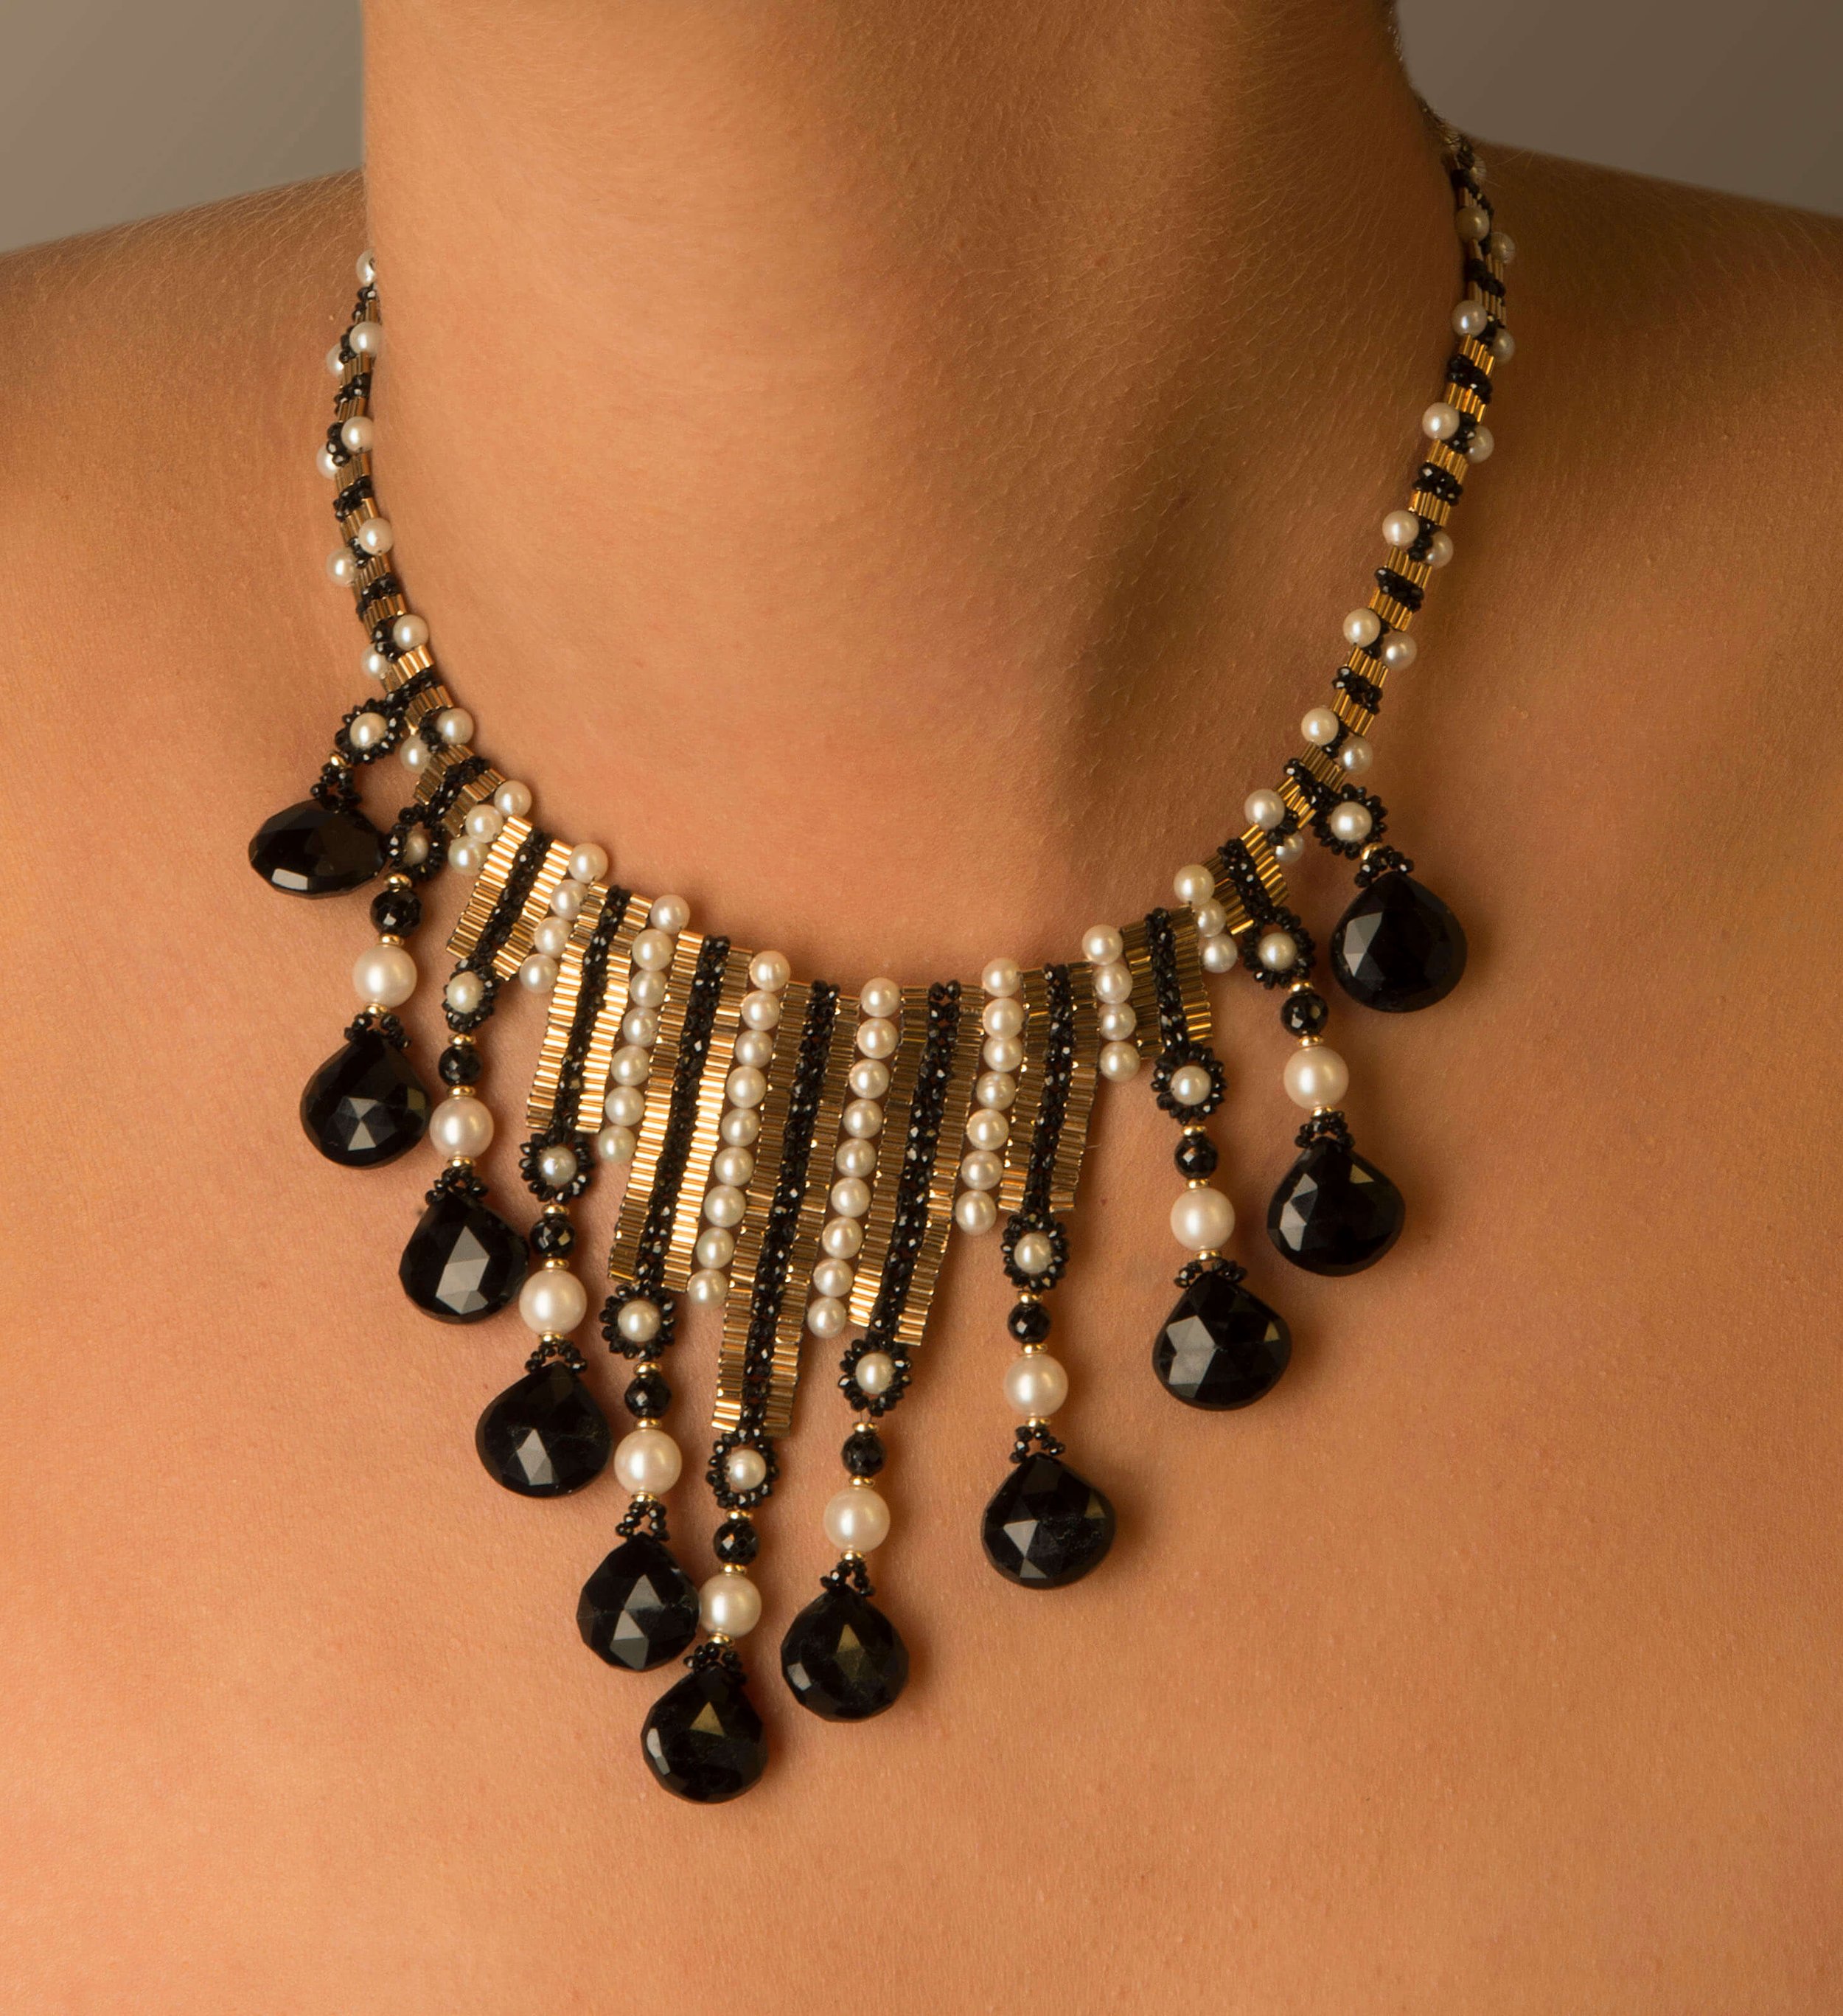 This choker is entirely hand woven of 14k gold, black spinel, white freshwater pearls, and onyx drops.